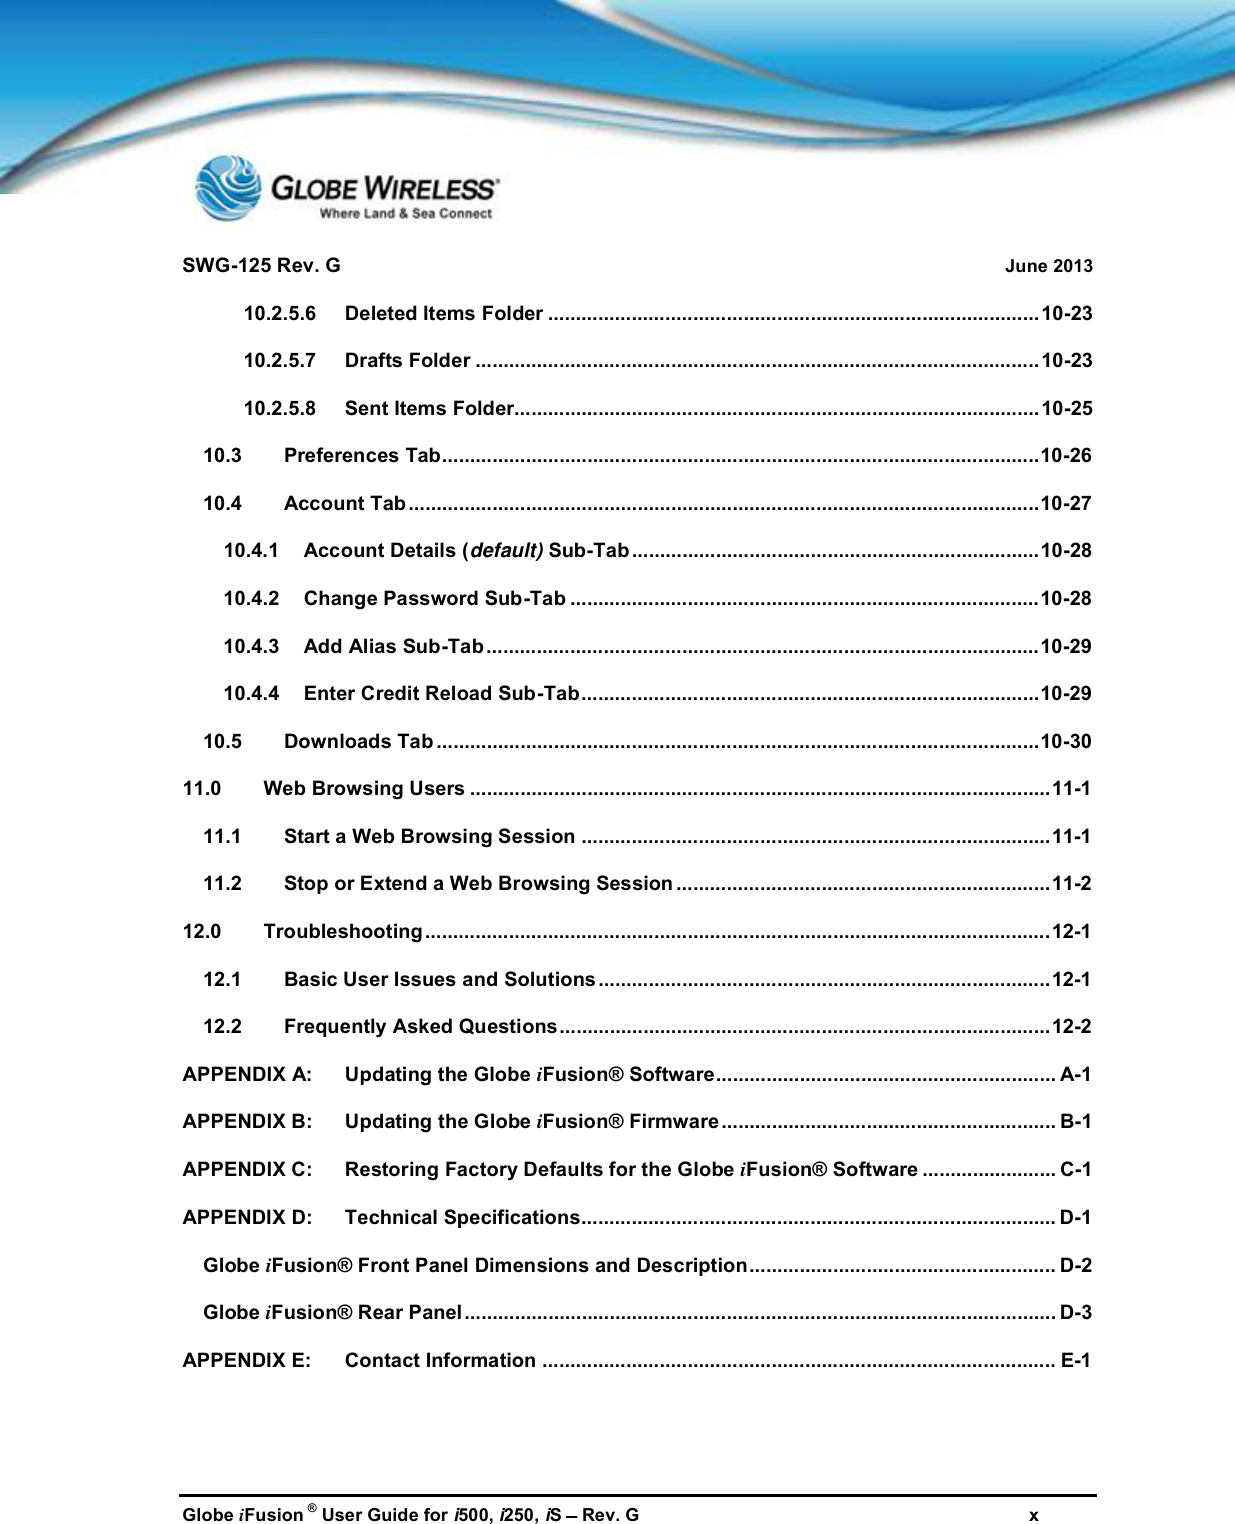 SWG-125 Rev. G June 2013Globe iFusion ®User Guide for i500, i250, iSRev. G x10.2.5.6 Deleted Items Folder ........................................................................................10-2310.2.5.7 Drafts Folder .....................................................................................................10-2310.2.5.8 Sent Items Folder..............................................................................................10-2510.3 Preferences Tab...........................................................................................................10-2610.4 Account Tab.................................................................................................................10-2710.4.1 Account Details (default) Sub-Tab .........................................................................10-2810.4.2 Change Password Sub-Tab ....................................................................................10-2810.4.3 Add Alias Sub-Tab...................................................................................................10-2910.4.4 Enter Credit Reload Sub-Tab..................................................................................10-2910.5 Downloads Tab ............................................................................................................10-3011.0 Web Browsing Users ........................................................................................................11-111.1 Start a Web Browsing Session ....................................................................................11-111.2 Stop or Extend a Web Browsing Session ...................................................................11-212.0 Troubleshooting................................................................................................................12-112.1 Basic User Issues and Solutions.................................................................................12-112.2 Frequently Asked Questions........................................................................................12-2APPENDIX A: Updating the Globe iFusion® Software............................................................. A-1APPENDIX B: Updating the Globe iFusion® Firmware............................................................ B-1APPENDIX C: Restoring Factory Defaults for the Globe iFusion® Software ........................ C-1APPENDIX D: Technical Specifications..................................................................................... D-1Globe iFusion® Front Panel Dimensions and Description....................................................... D-2Globe iFusion® Rear Panel.......................................................................................................... D-3APPENDIX E: Contact Information ............................................................................................ E-1